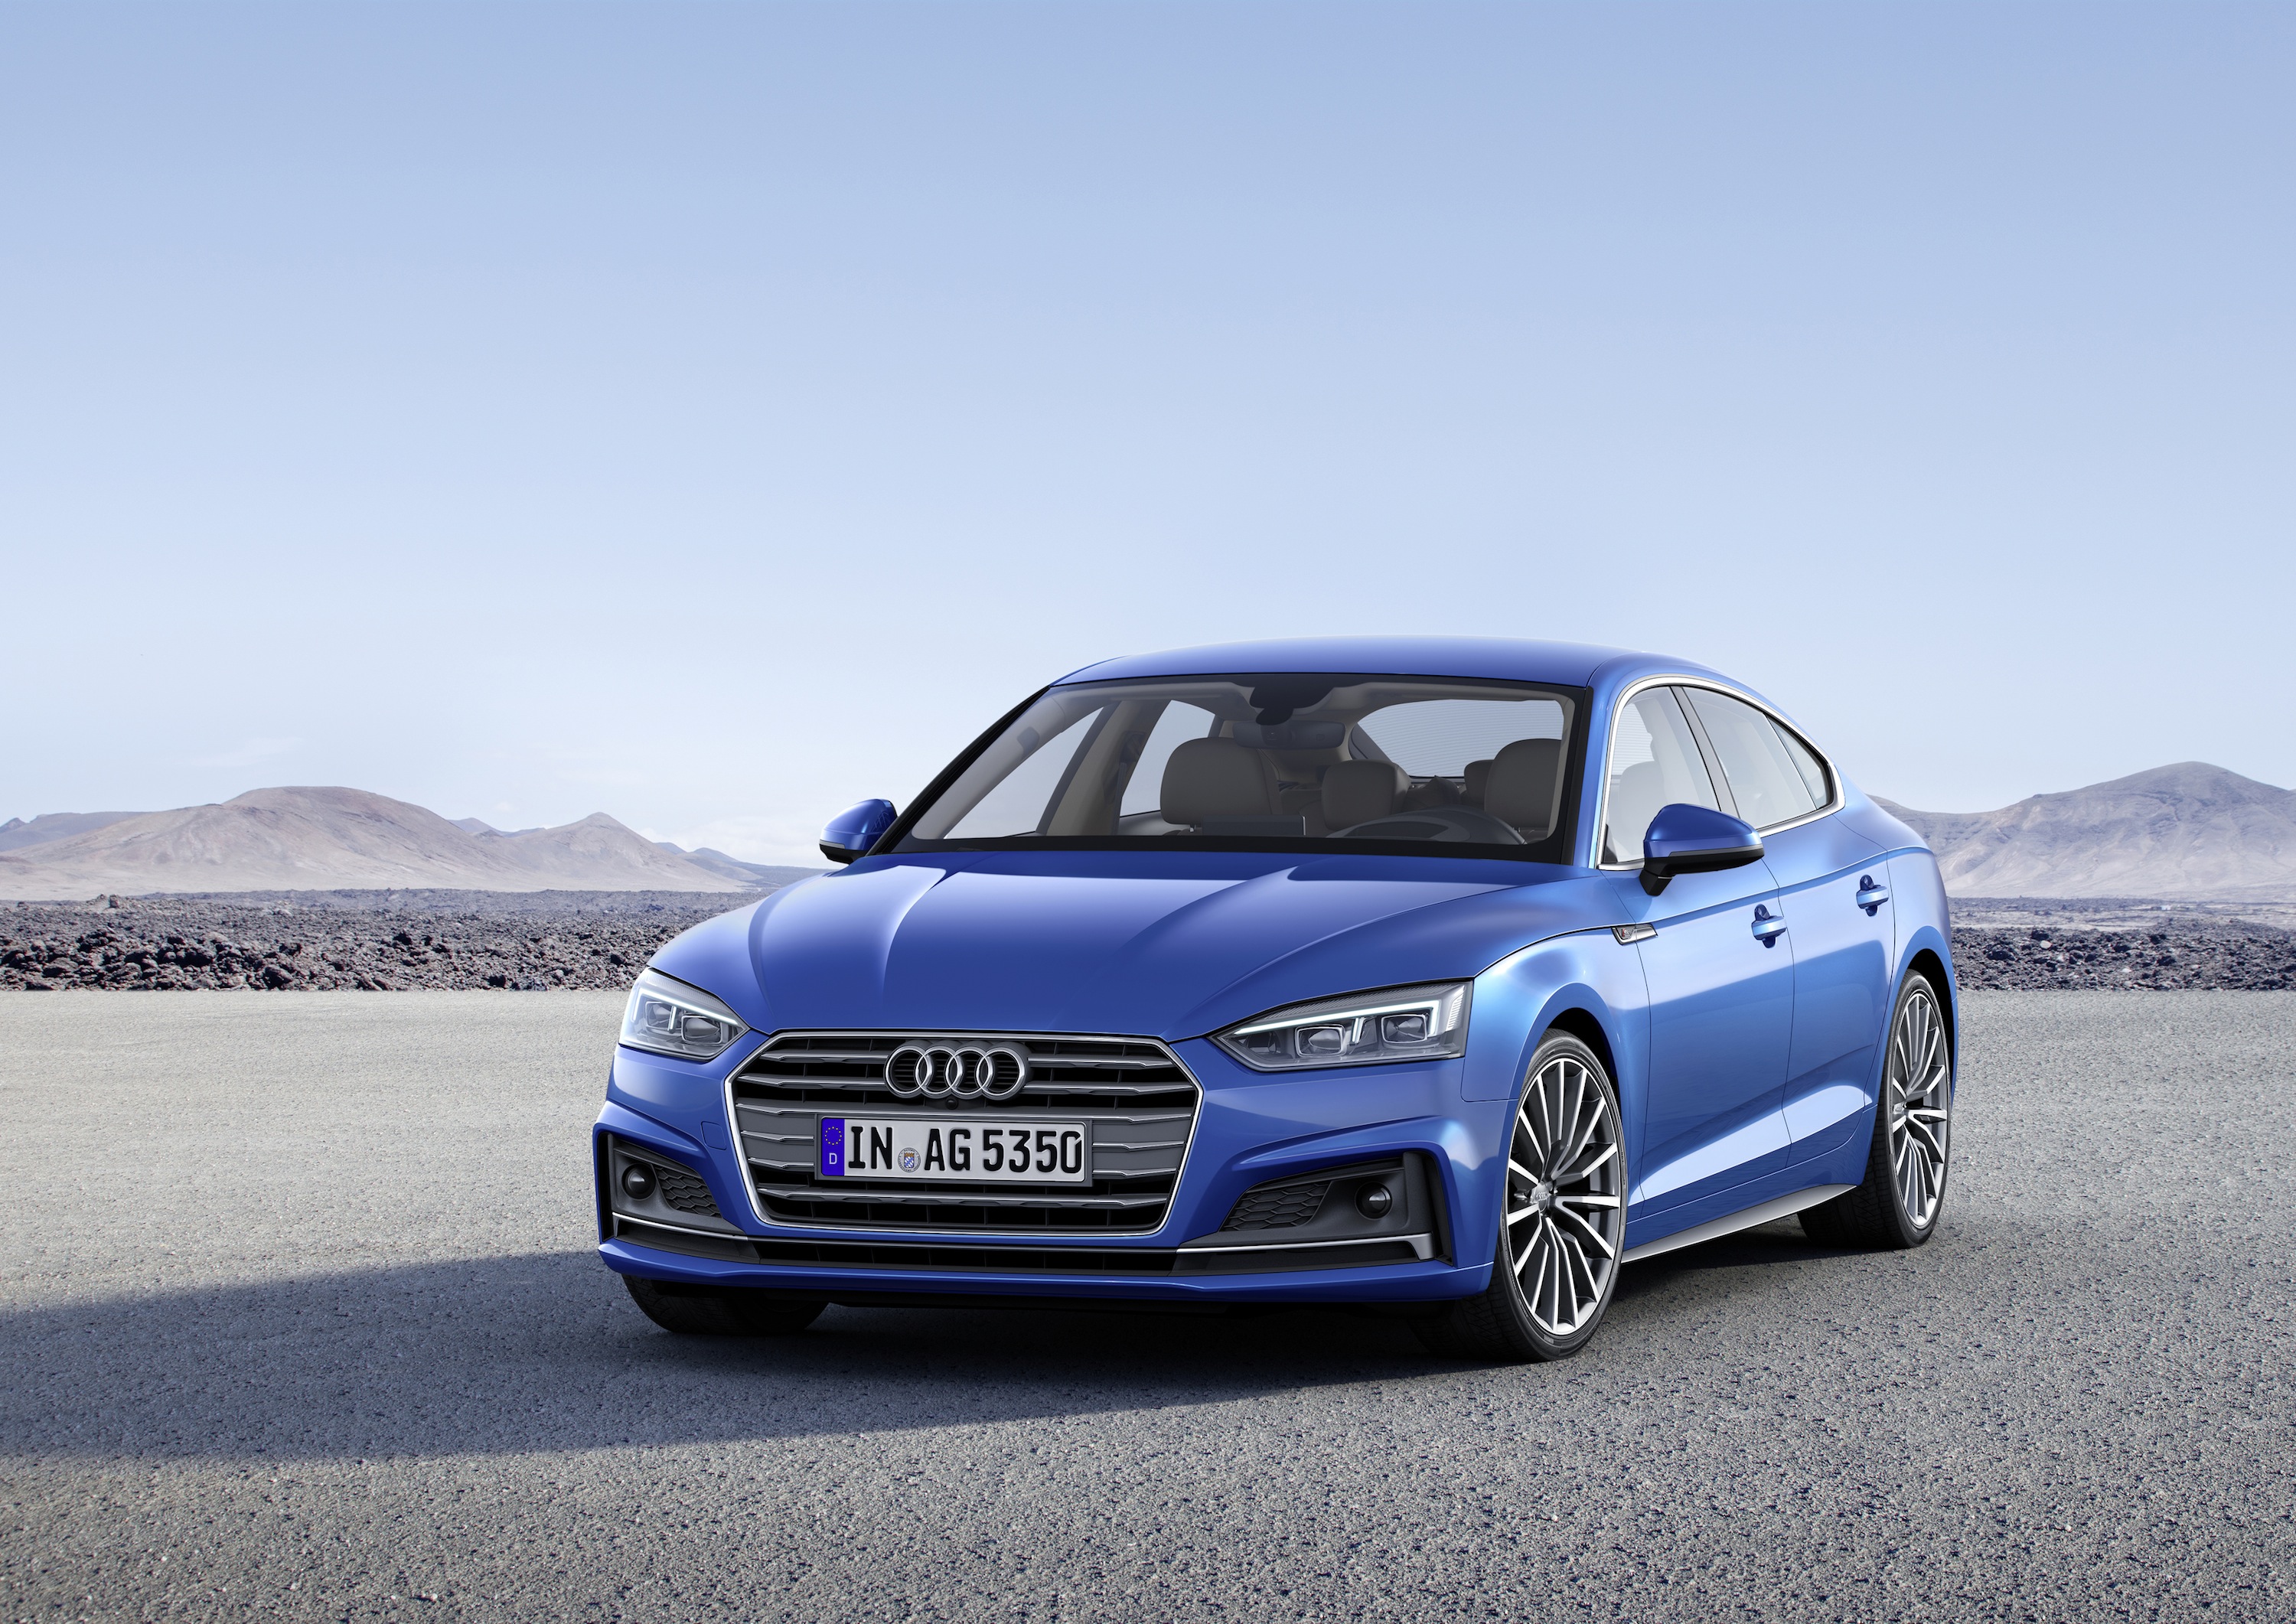 Audi A5 Sportback g-tron accessories restyling